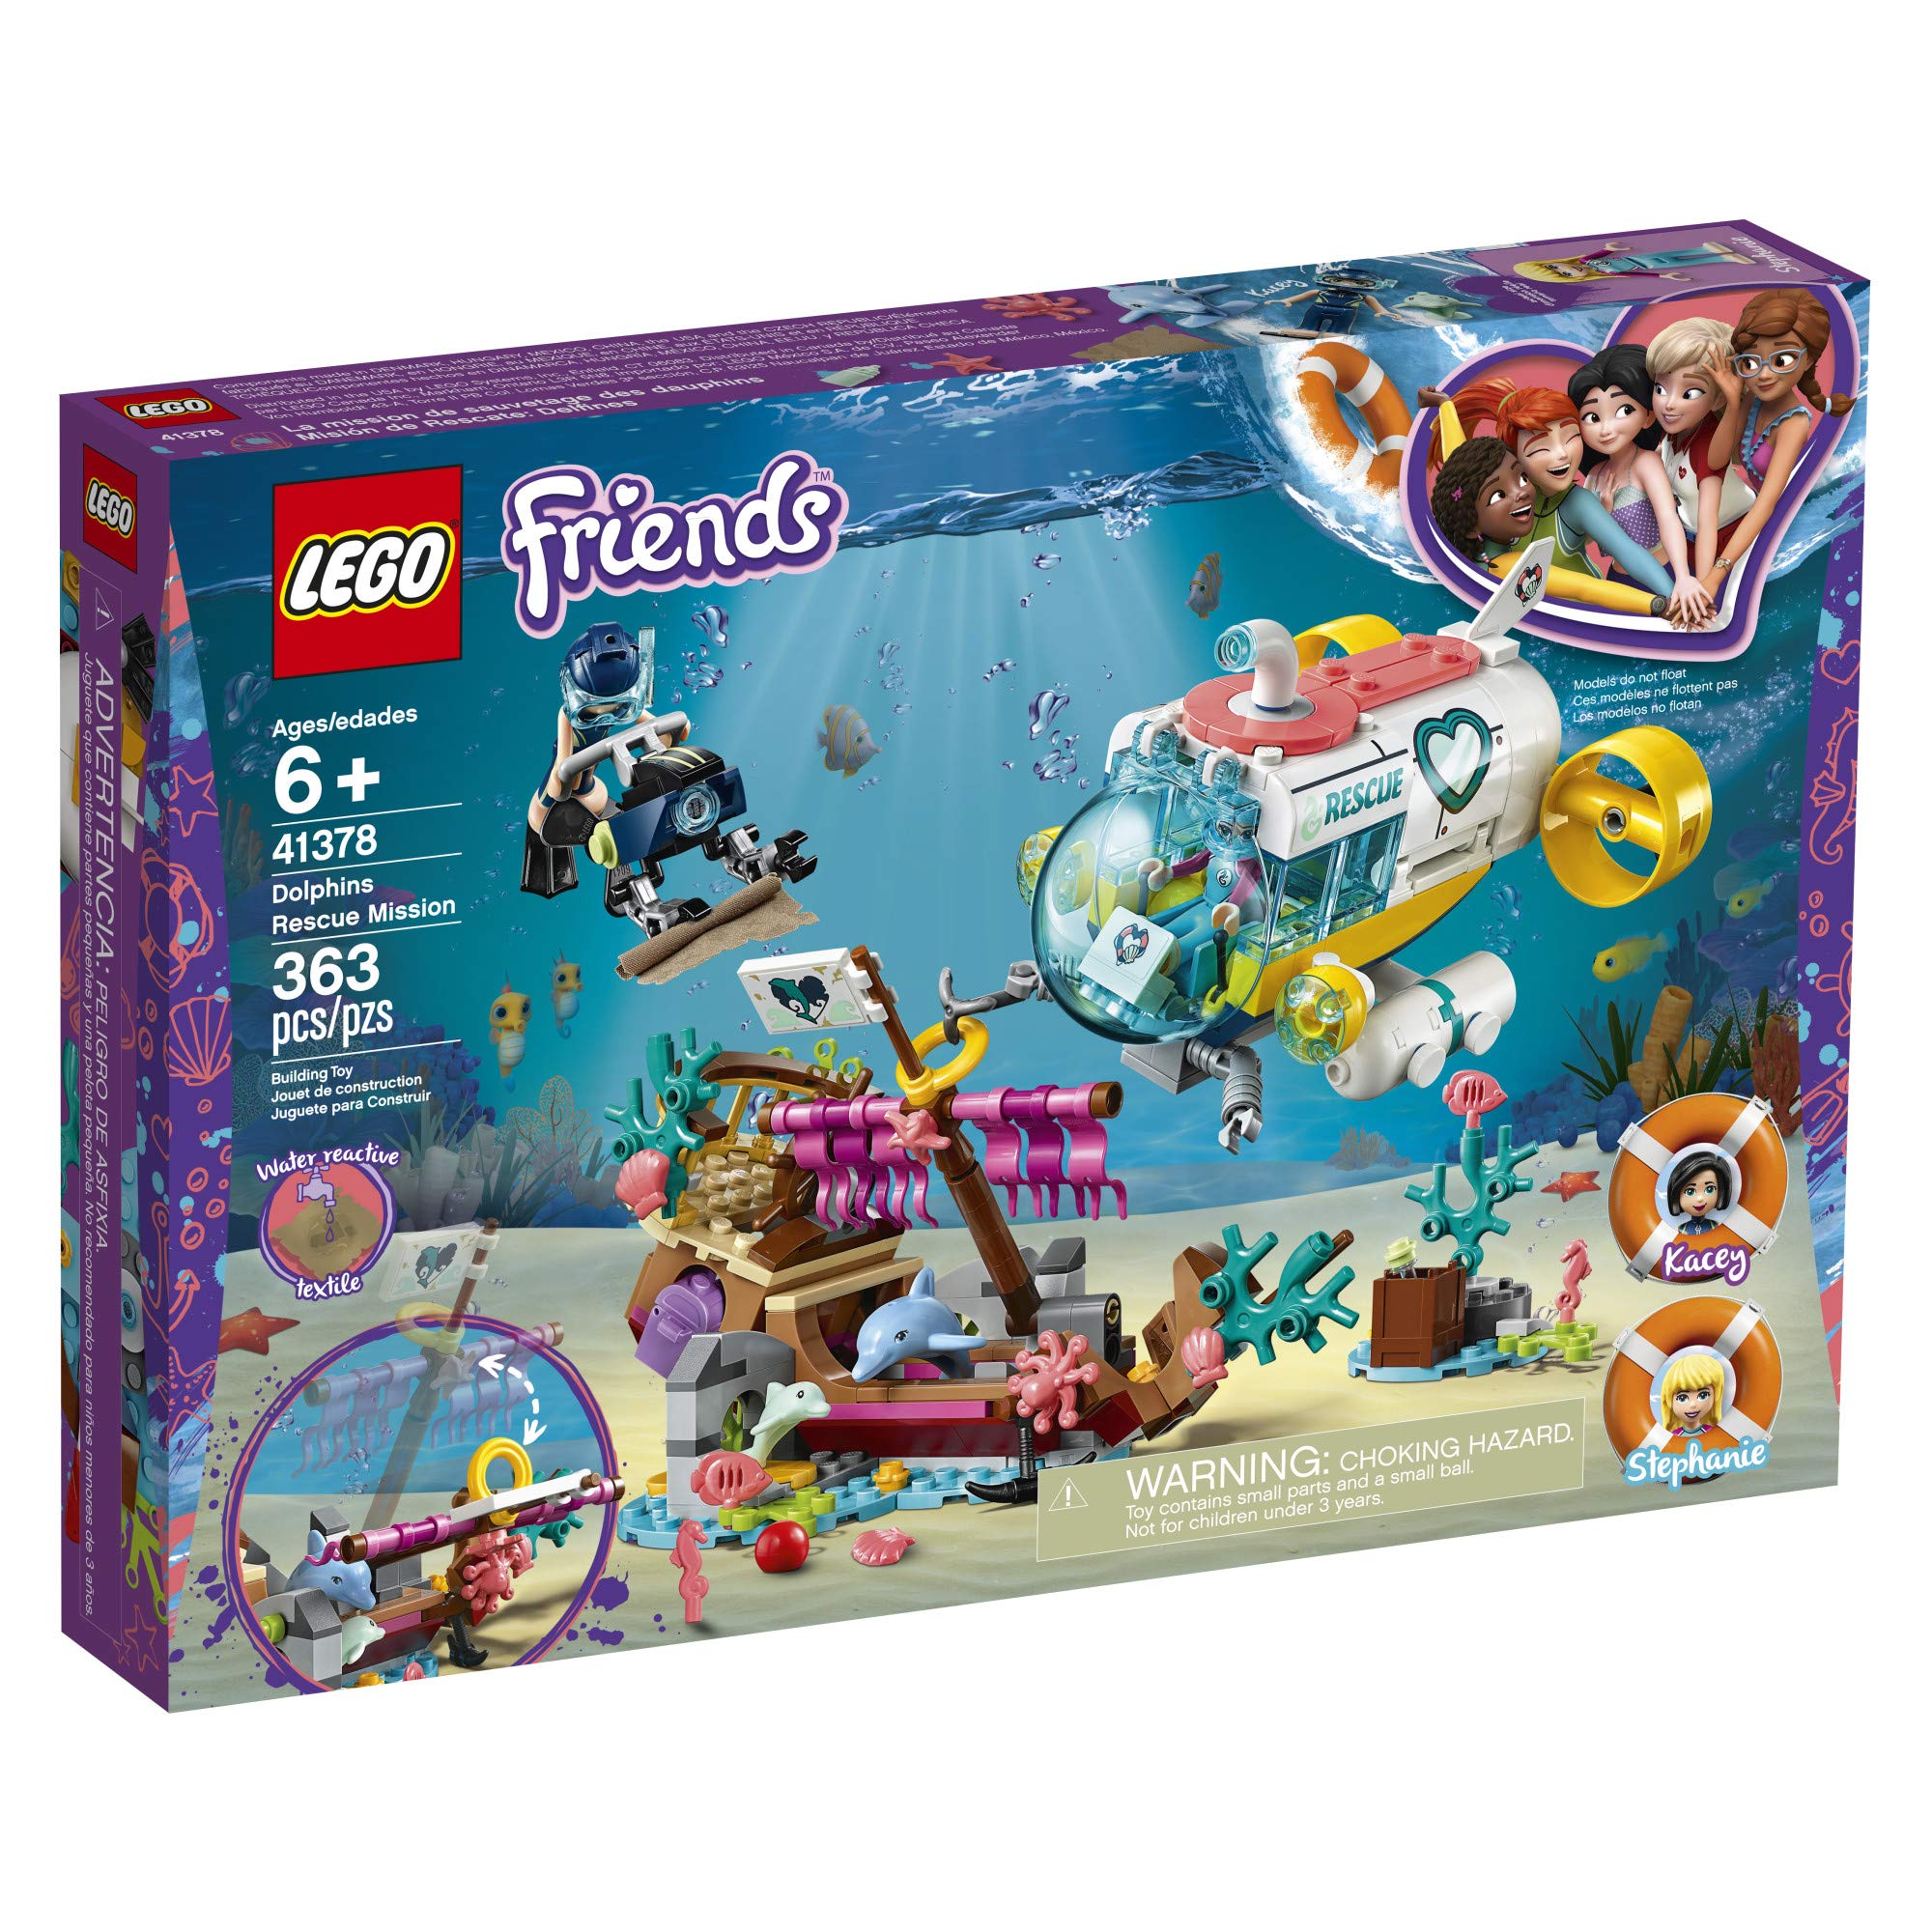 LEGO Friends Dolphins Rescue Mission 41378 Building Kit with Toy Submarine and Sea Creatures, Fun Sea Life Playset with Kacey and Stephanie Minifigures for Group Play (363 Pieces)